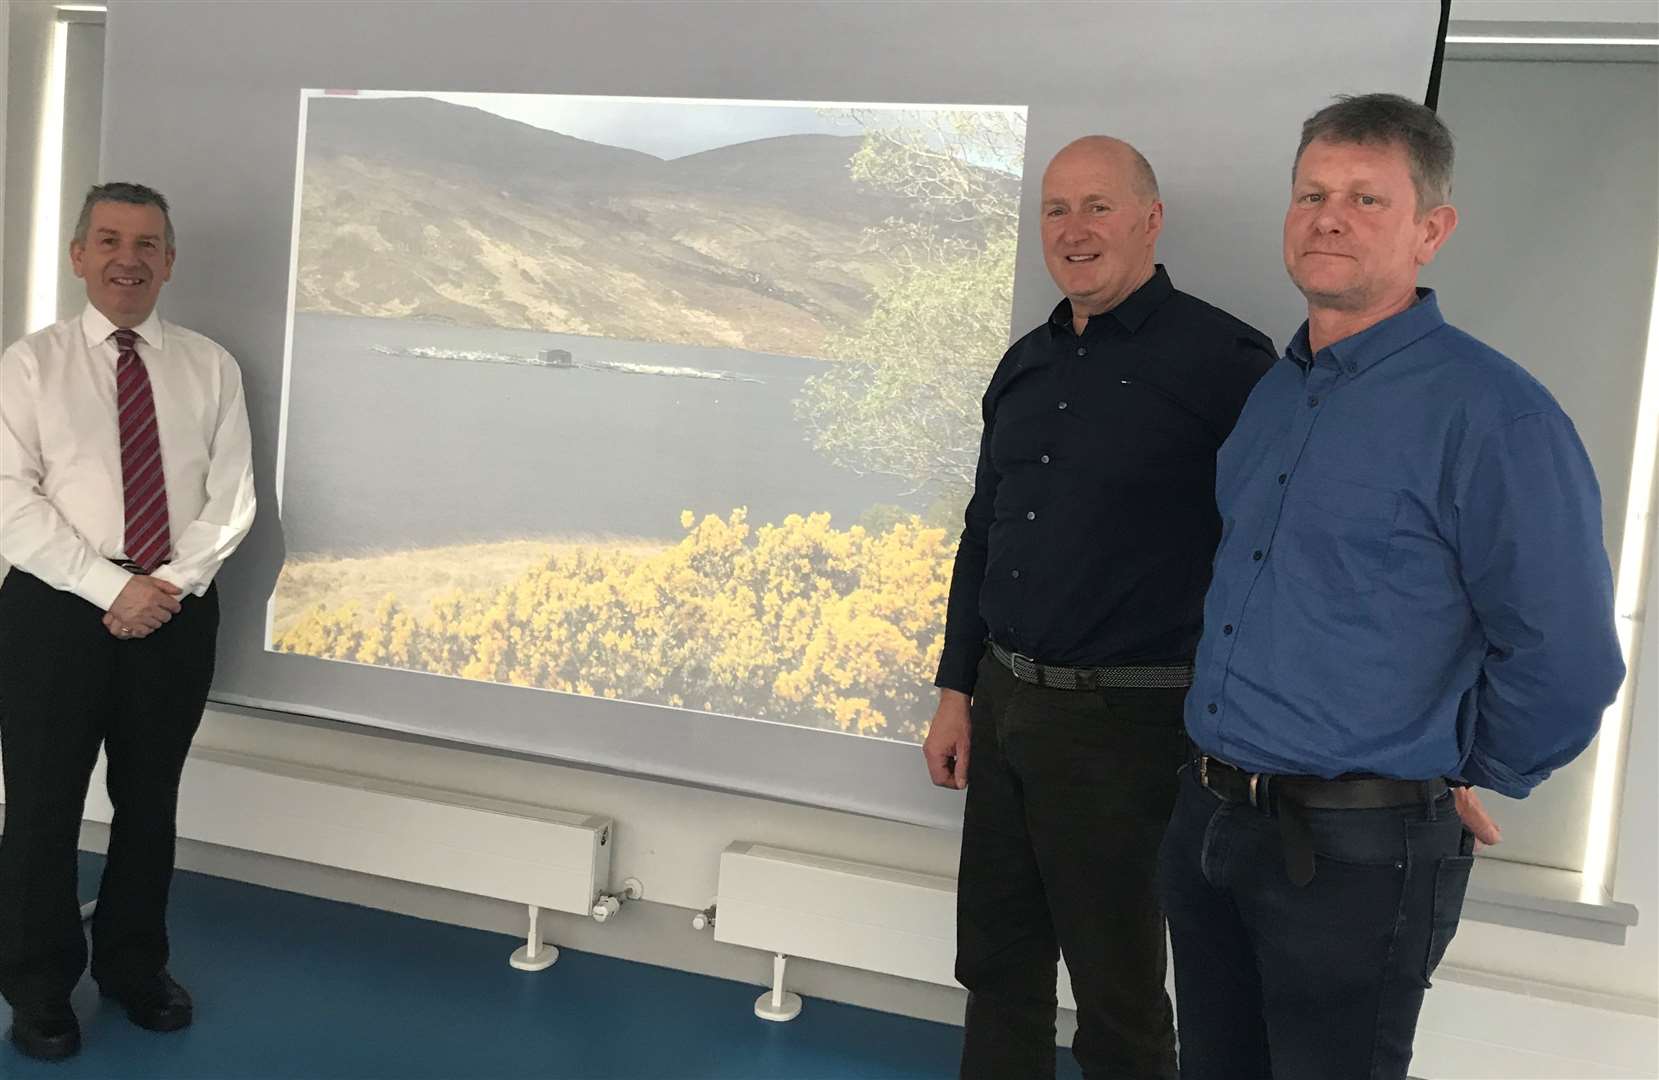 David Stewart (left) with Hugh Murray and David Catto (right) and, in the background, a photo of one of the company’s sites on Loch Merkland.